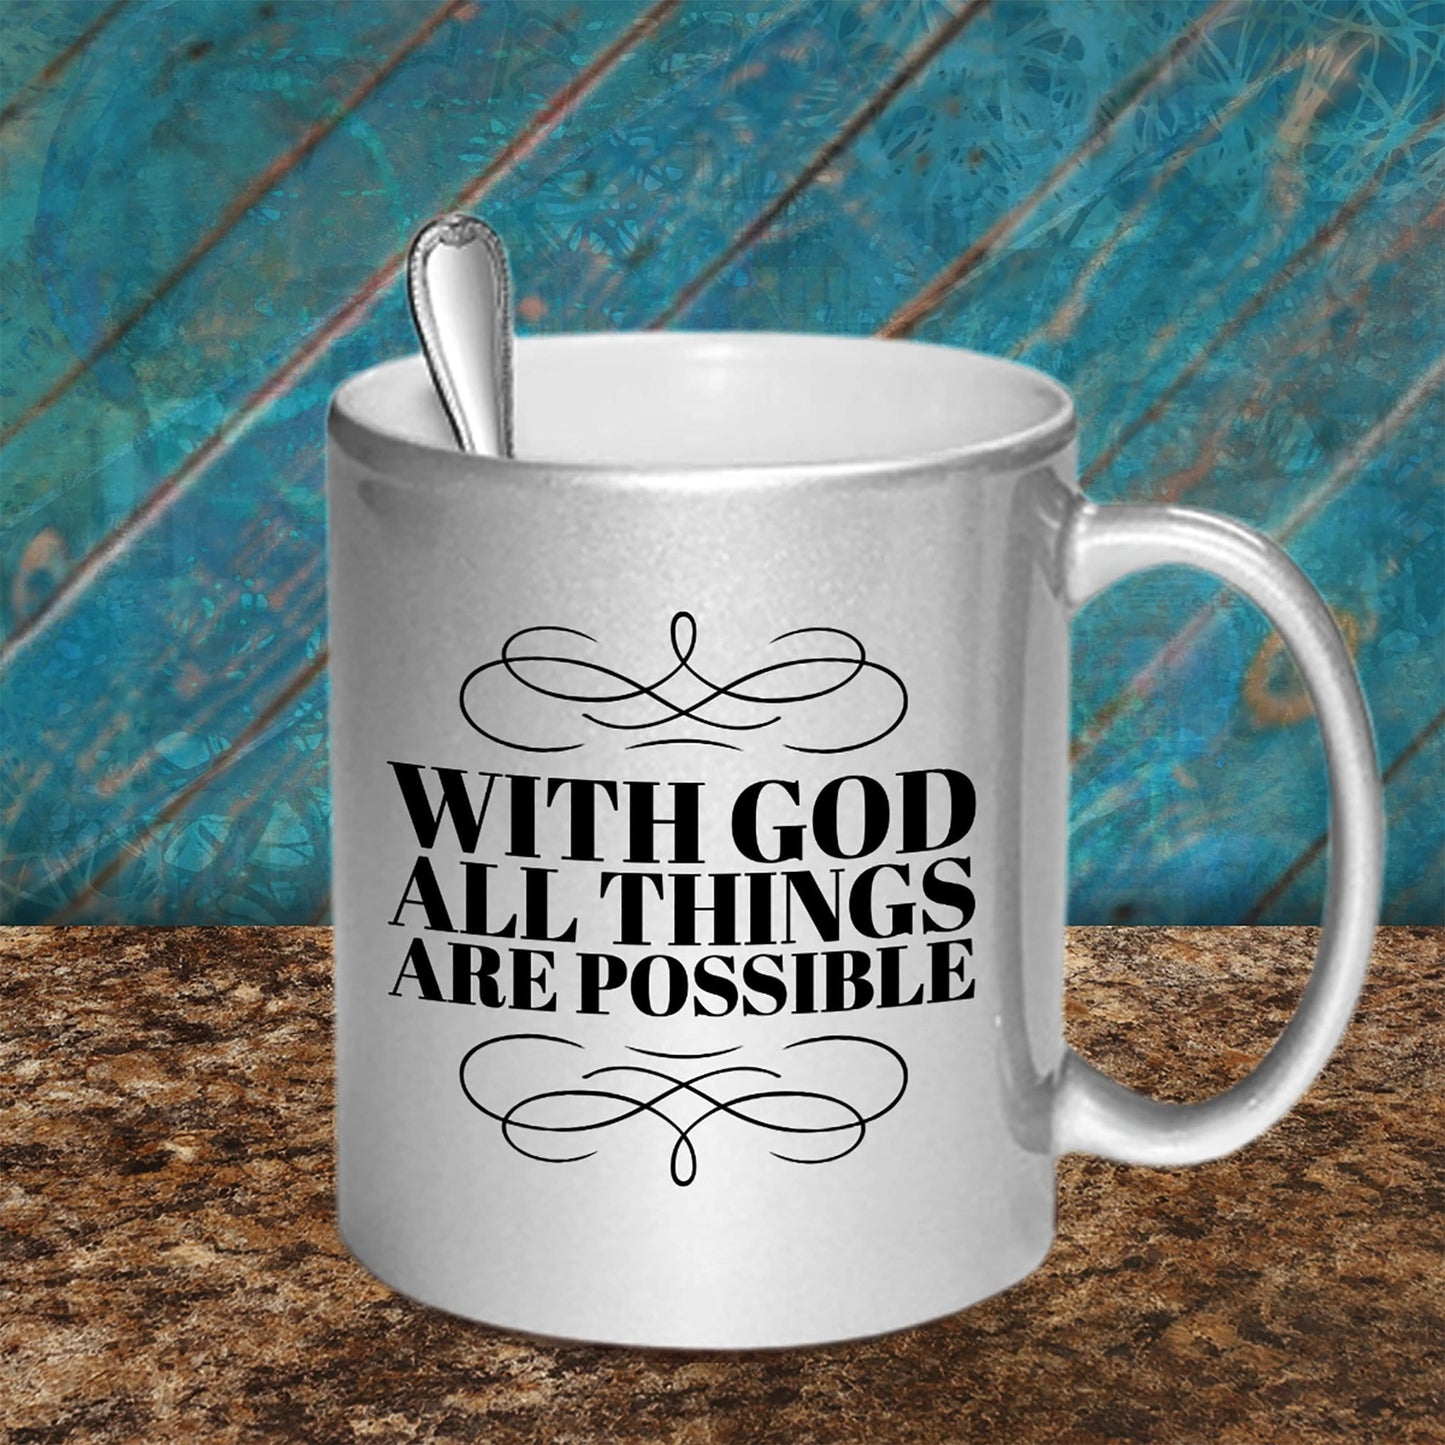 With God All Things are Possible Metallic Toned Coffee Mug